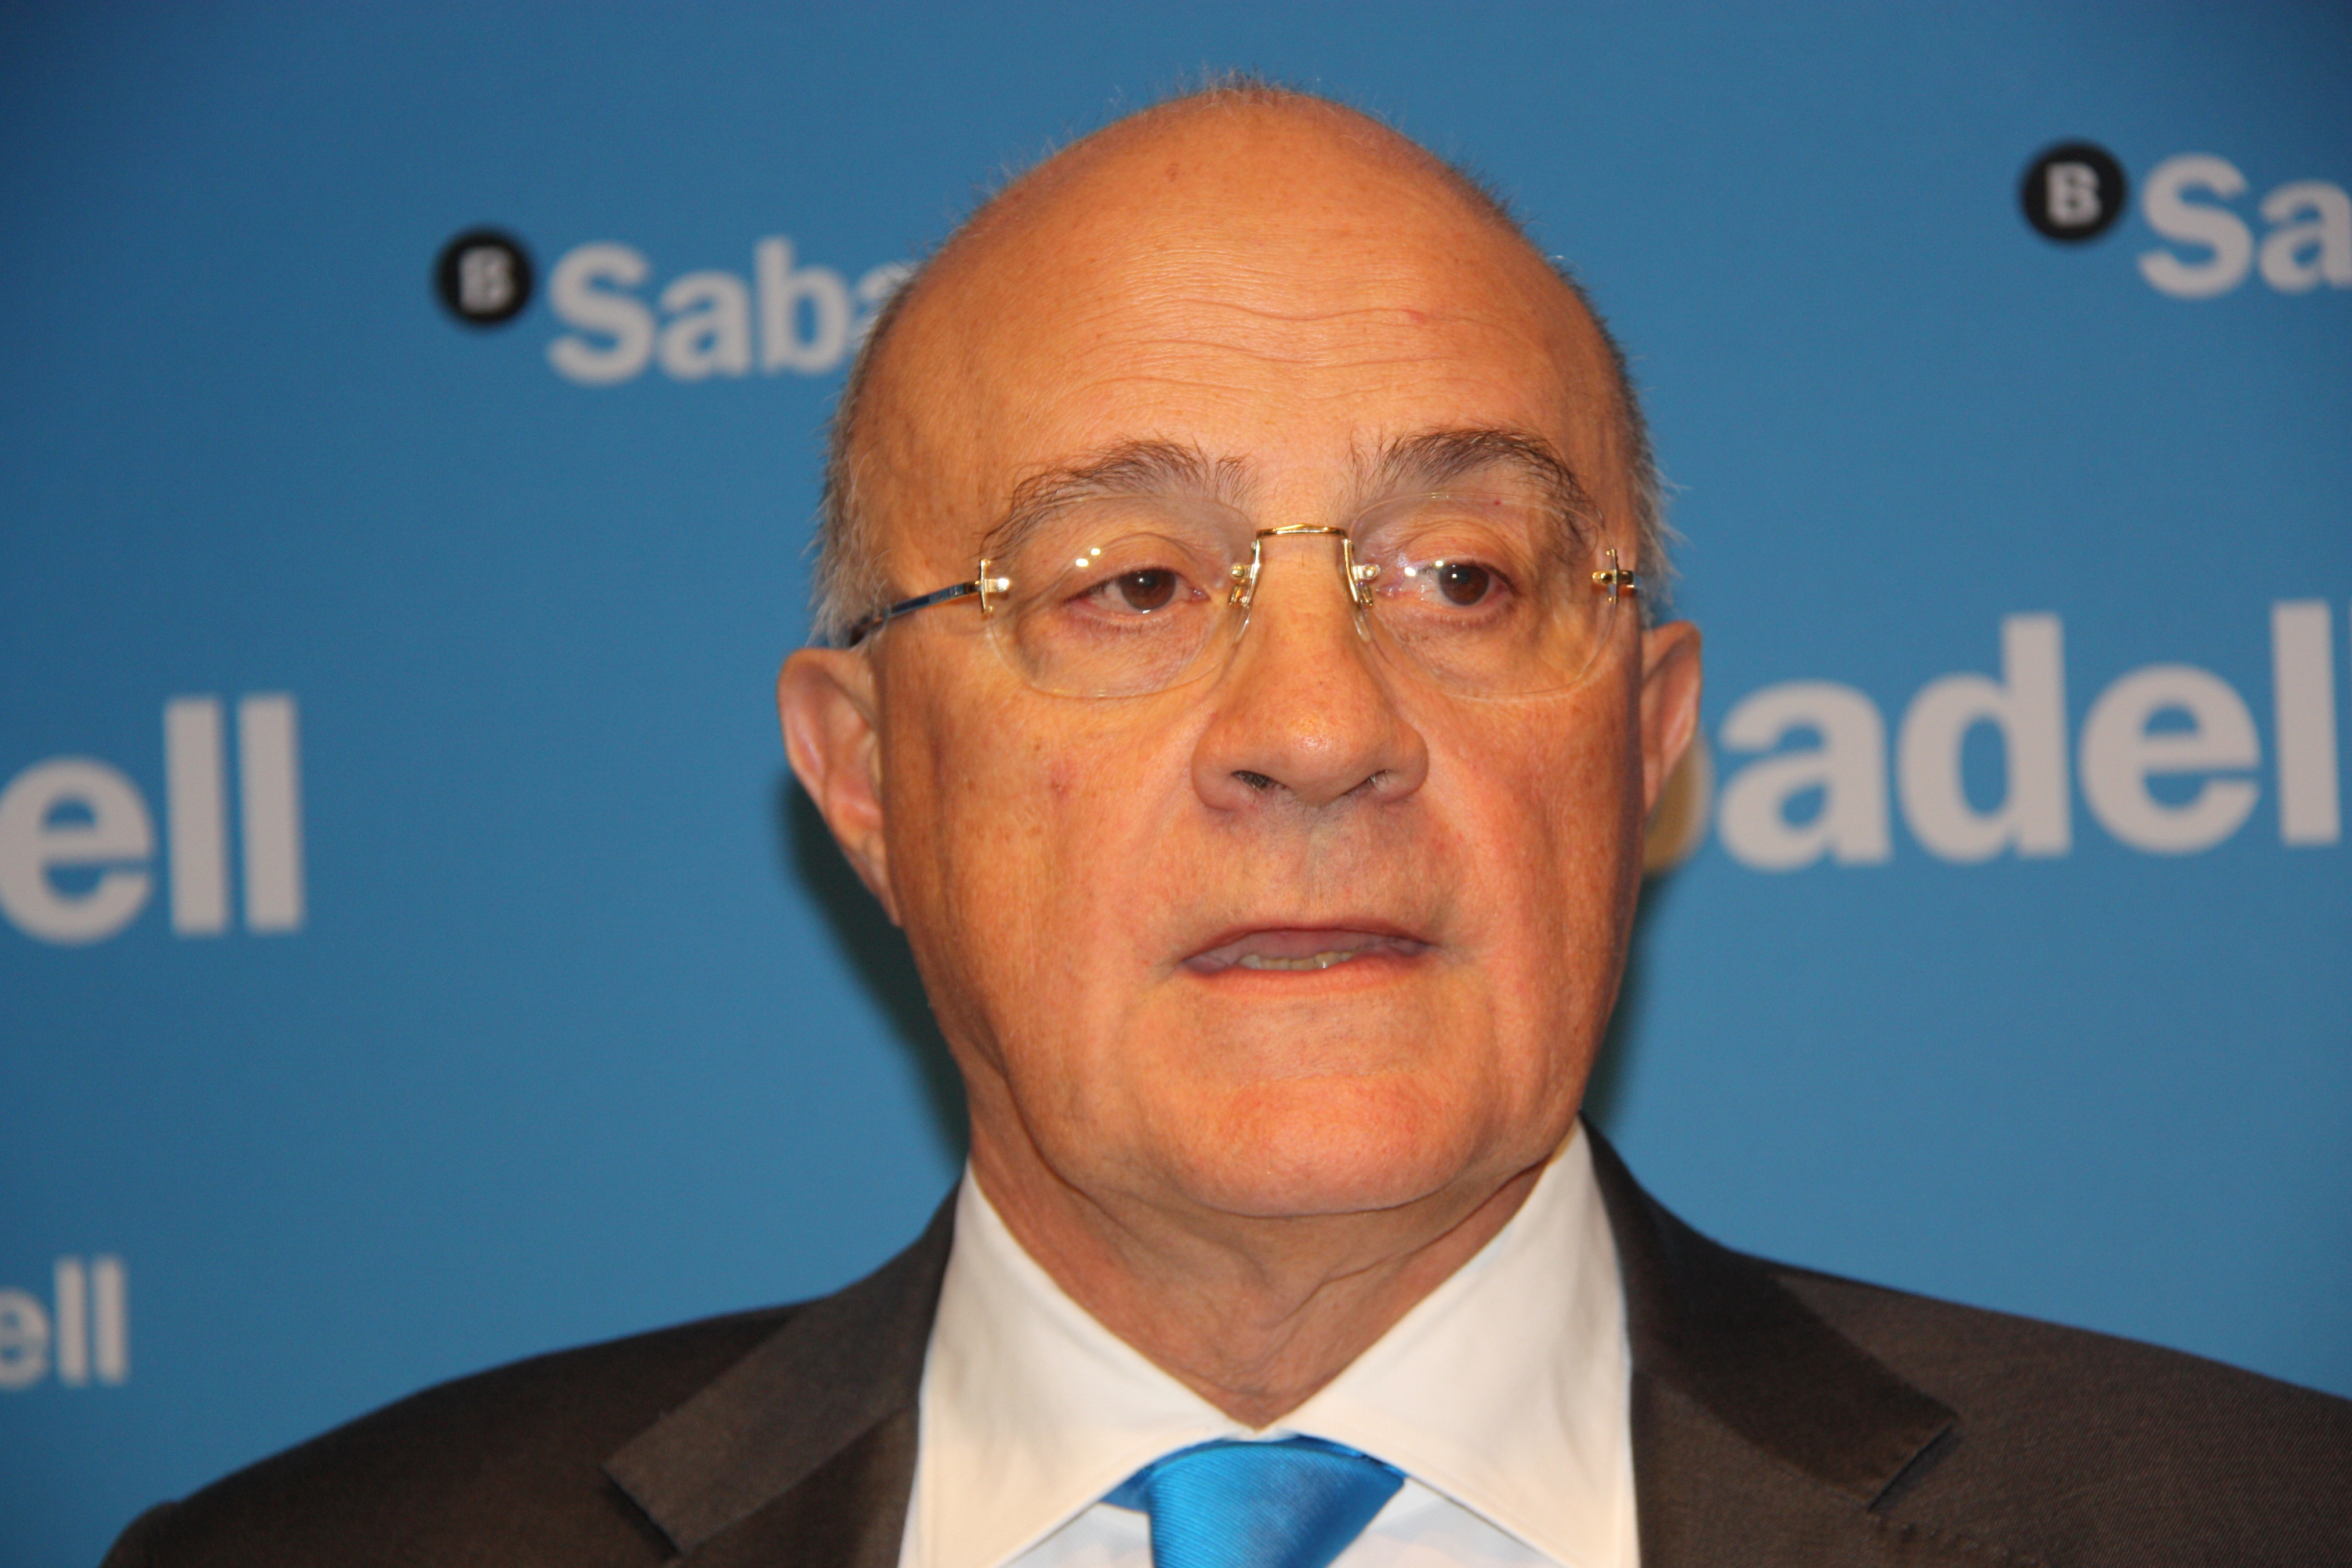 The chairman of Banc Sabadell, Josep Oliu (by ACN)